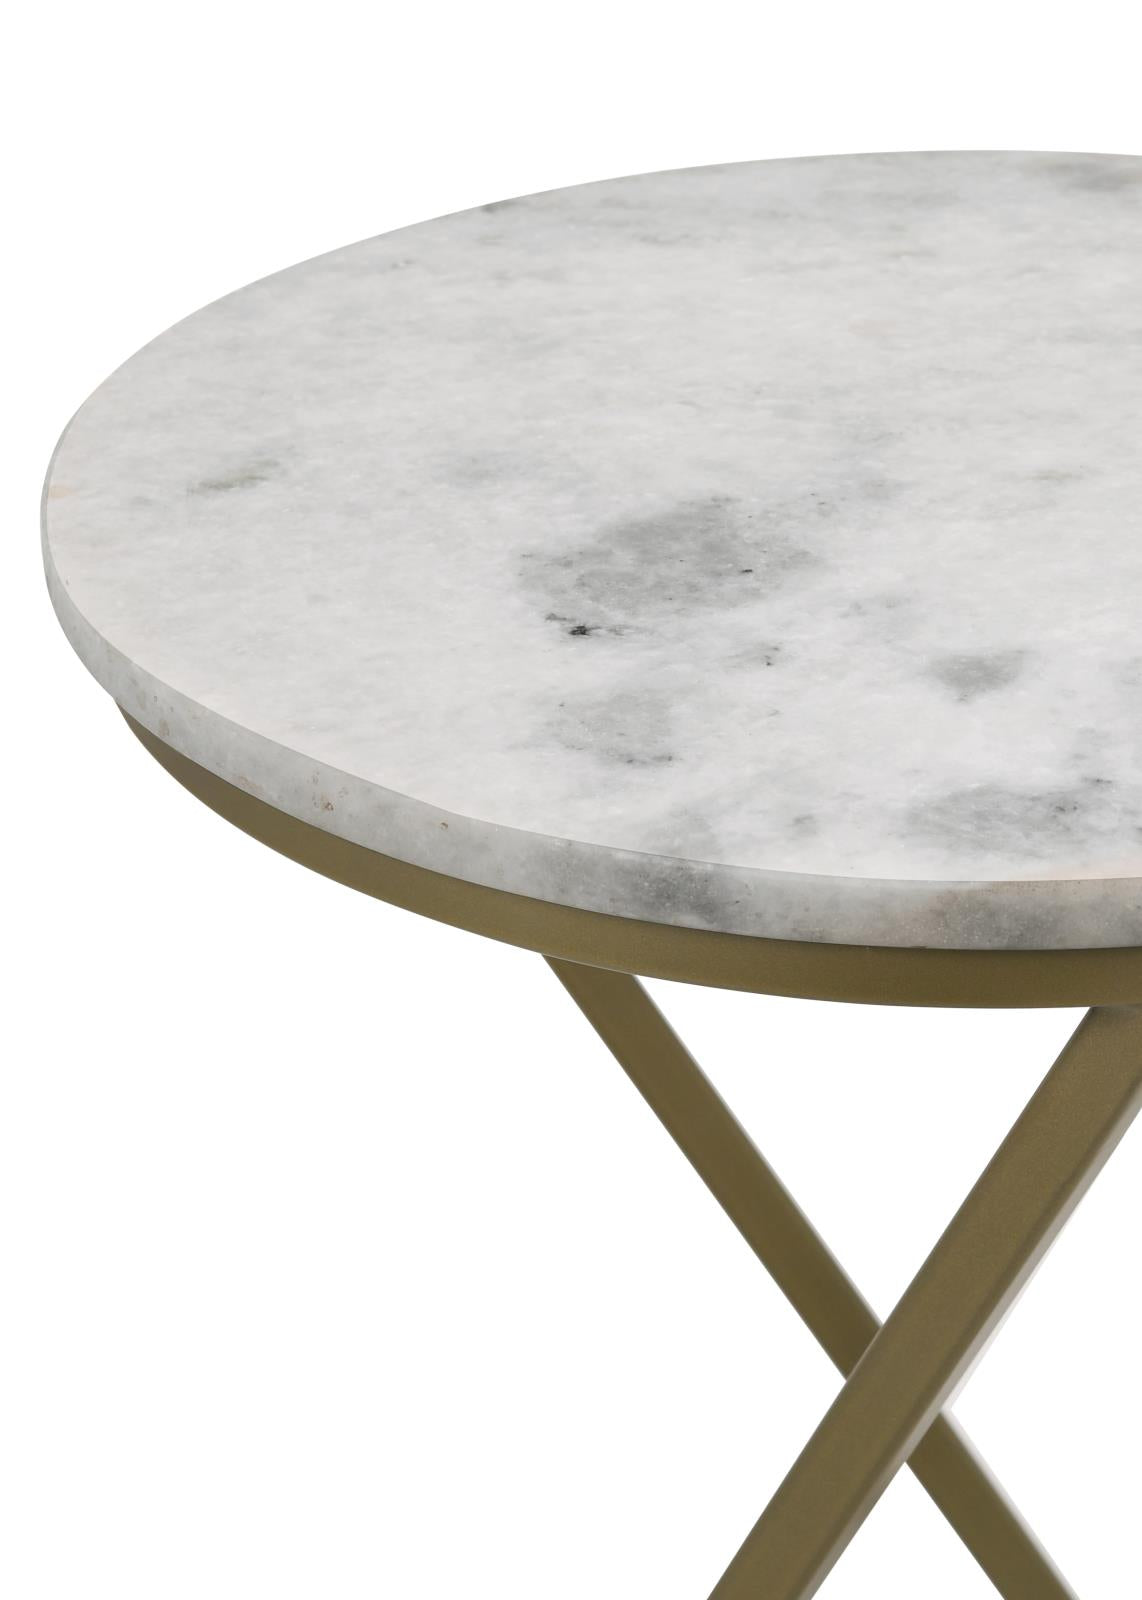 Malthe Round Accent Table with Marble Top White and Antique Gold - 959562 - Luna Furniture